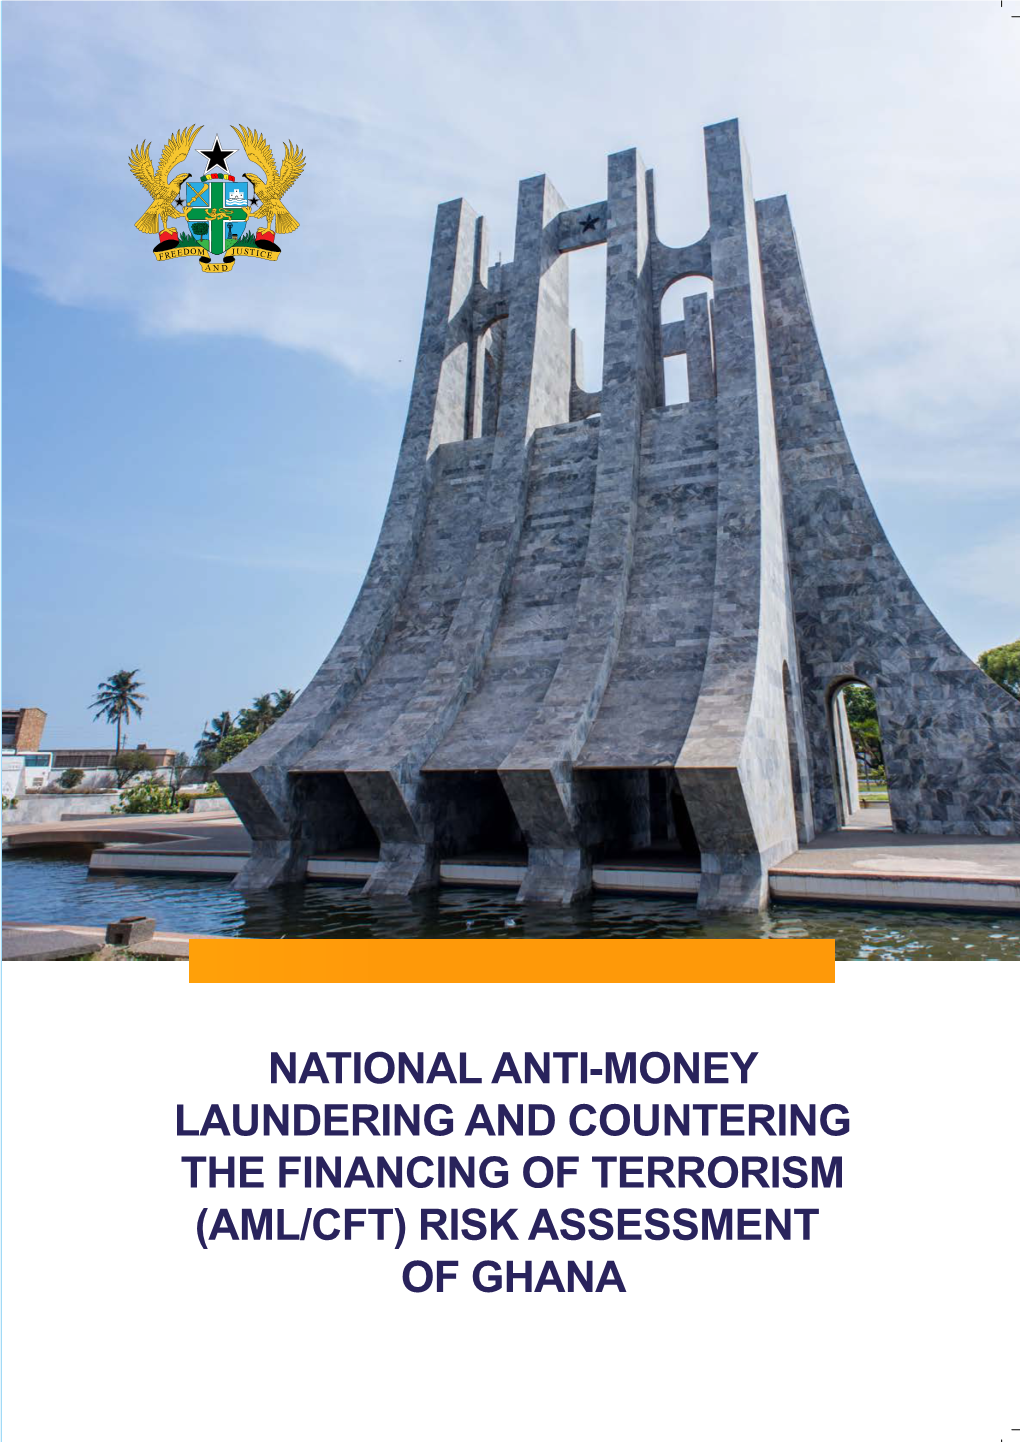 National Anti-Money Laundering and Countering the Financing of Terrorism (Aml/Cft) Risk Assessment of Ghana